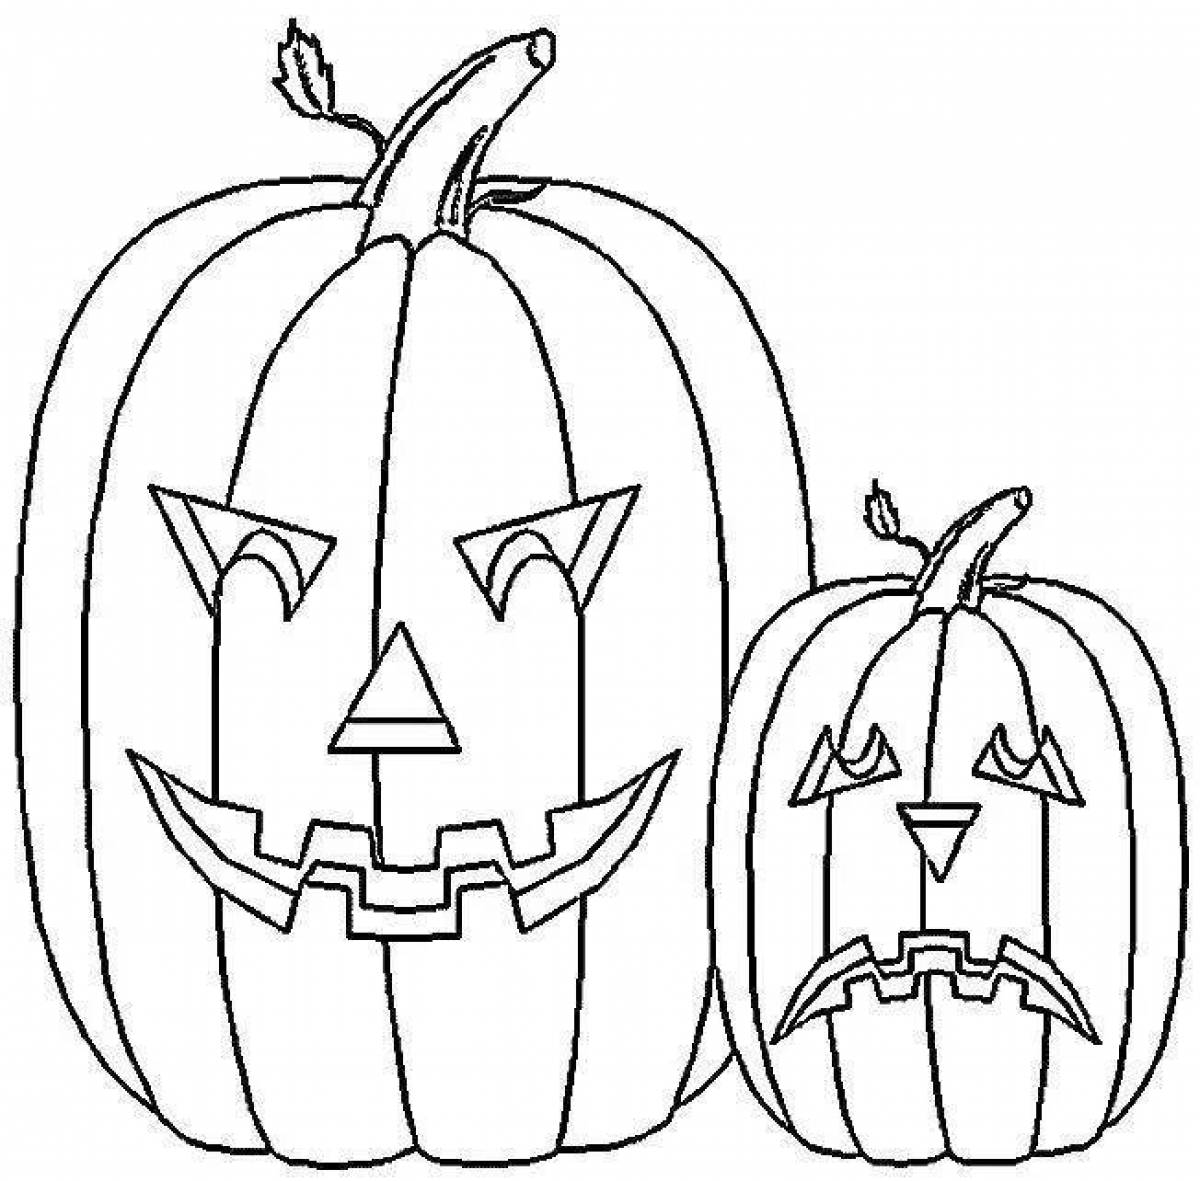 Cooling halloween pumpkin coloring page